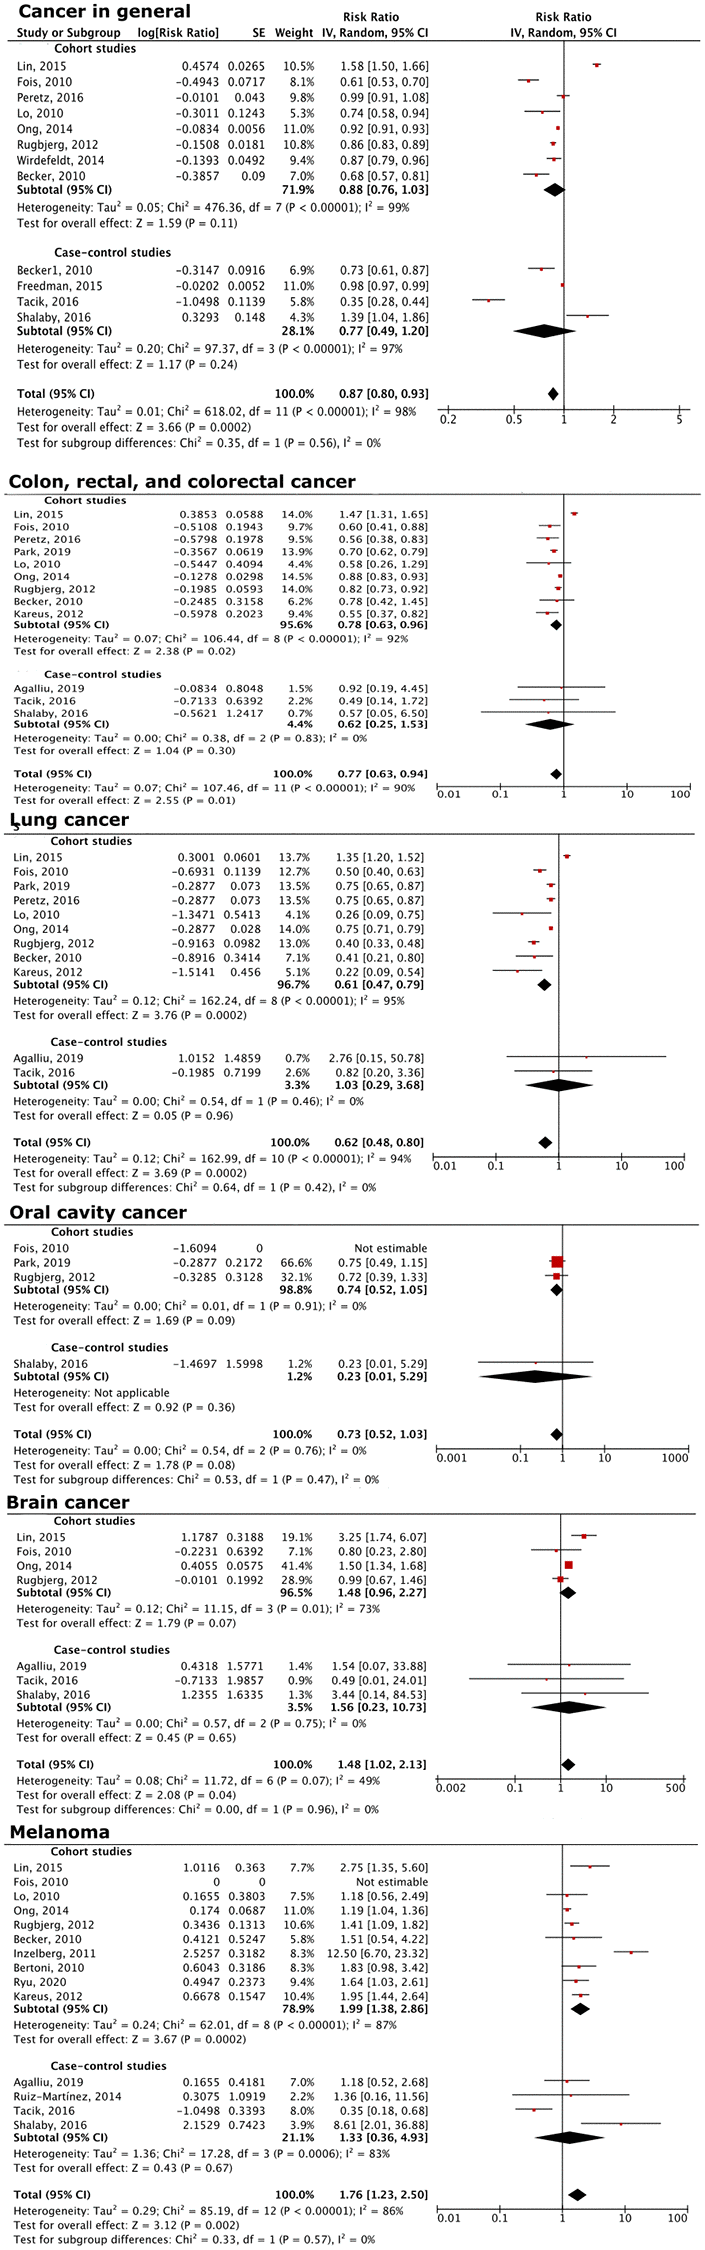 Forest plot of the association between PD and overall cancer risk, as well as that of specific cancers. PD patients had decreased overall cancer risks, and decreased risks of colon, rectal, colorectal, lung, oral cavity, brain cancers, and melanoma, compared to the general population.